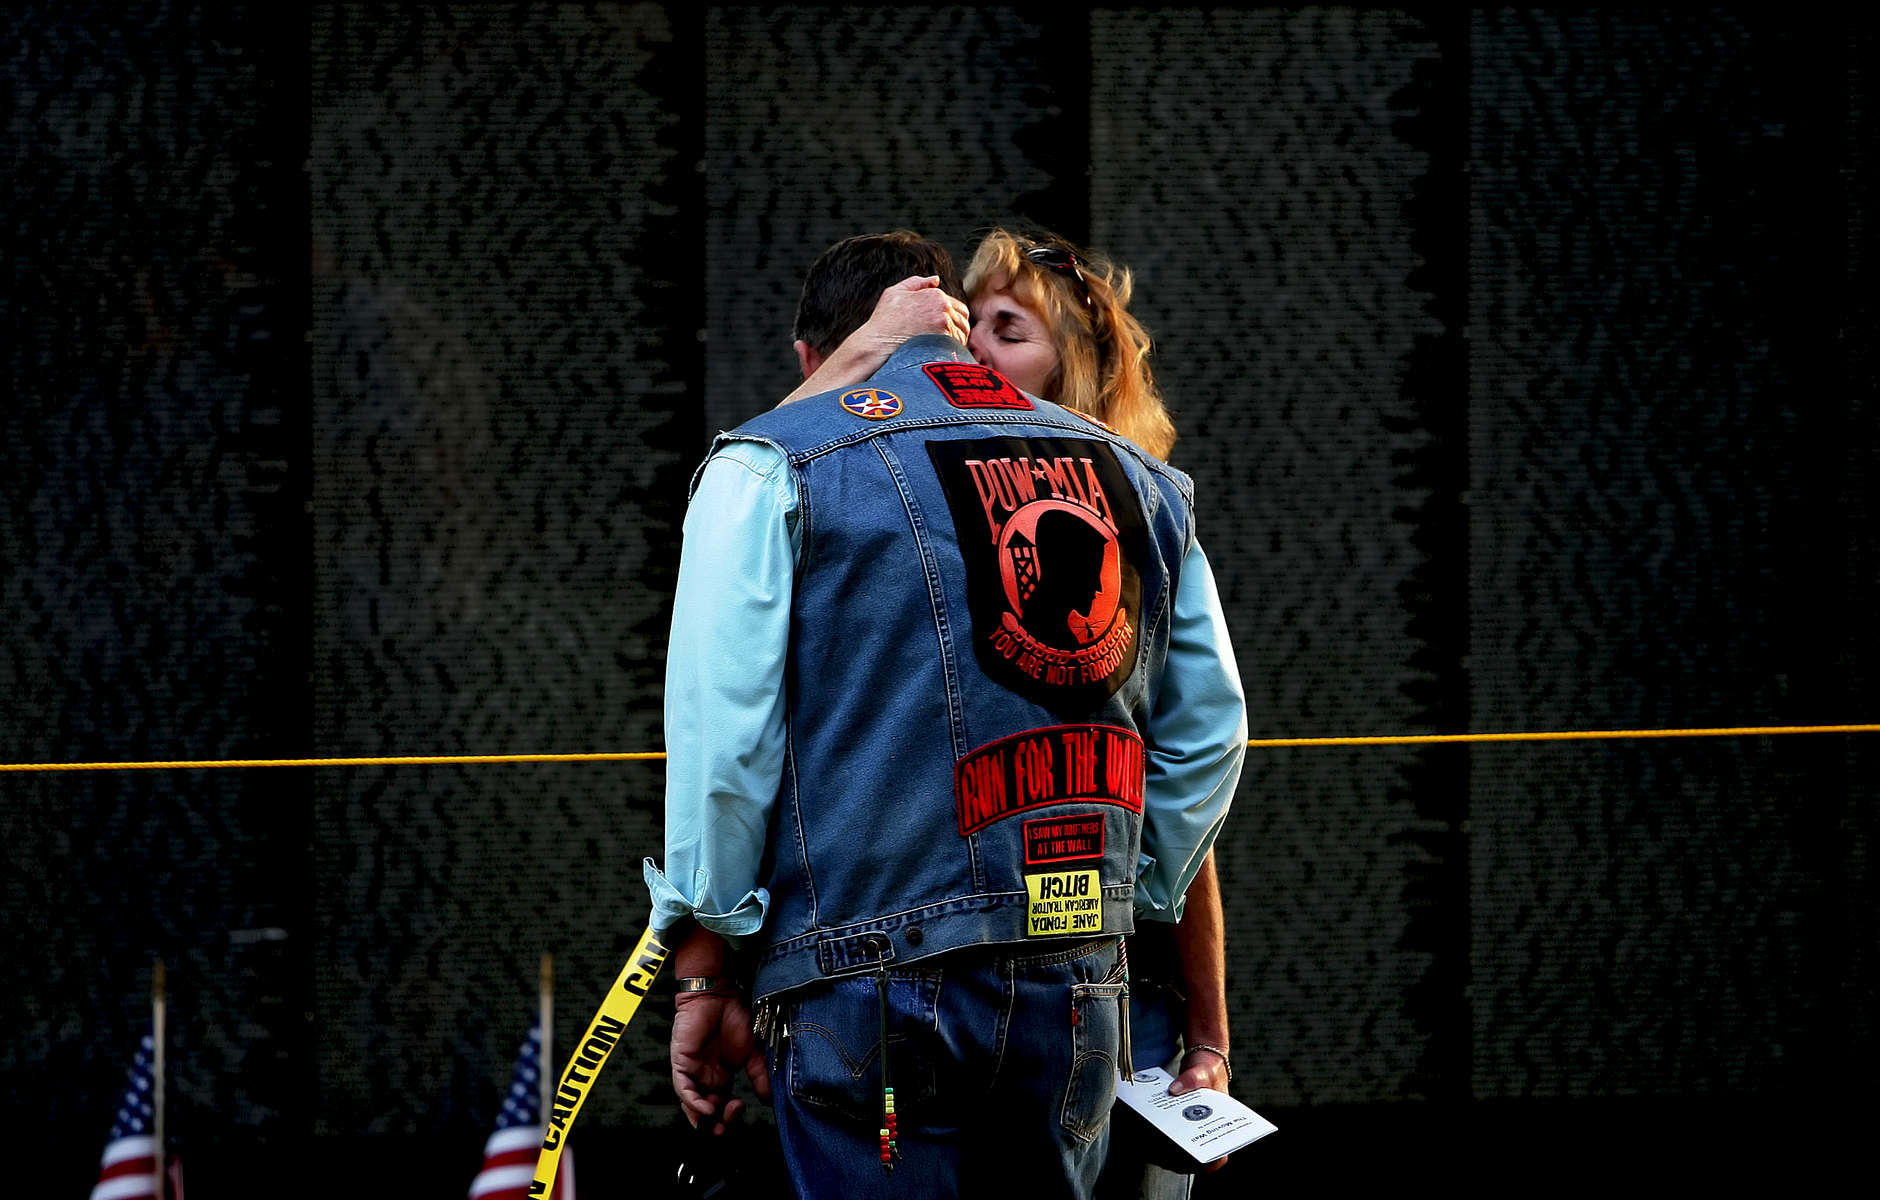 Robin Harp, 52, of Perris, Calif., kisses and comforts her husband United States Air Force Vietnam veteranBrent Harp as he broke down crying after seeing the name of his friend Jerald Coyle on the Vietnam Veterans Memorial Moving Wall at Sylvan Park in Redlands. Harp served two tours in Vietnam and was involved in the evacuation of Siagon. (The Press-Enterprise/ Mark Zaleski)